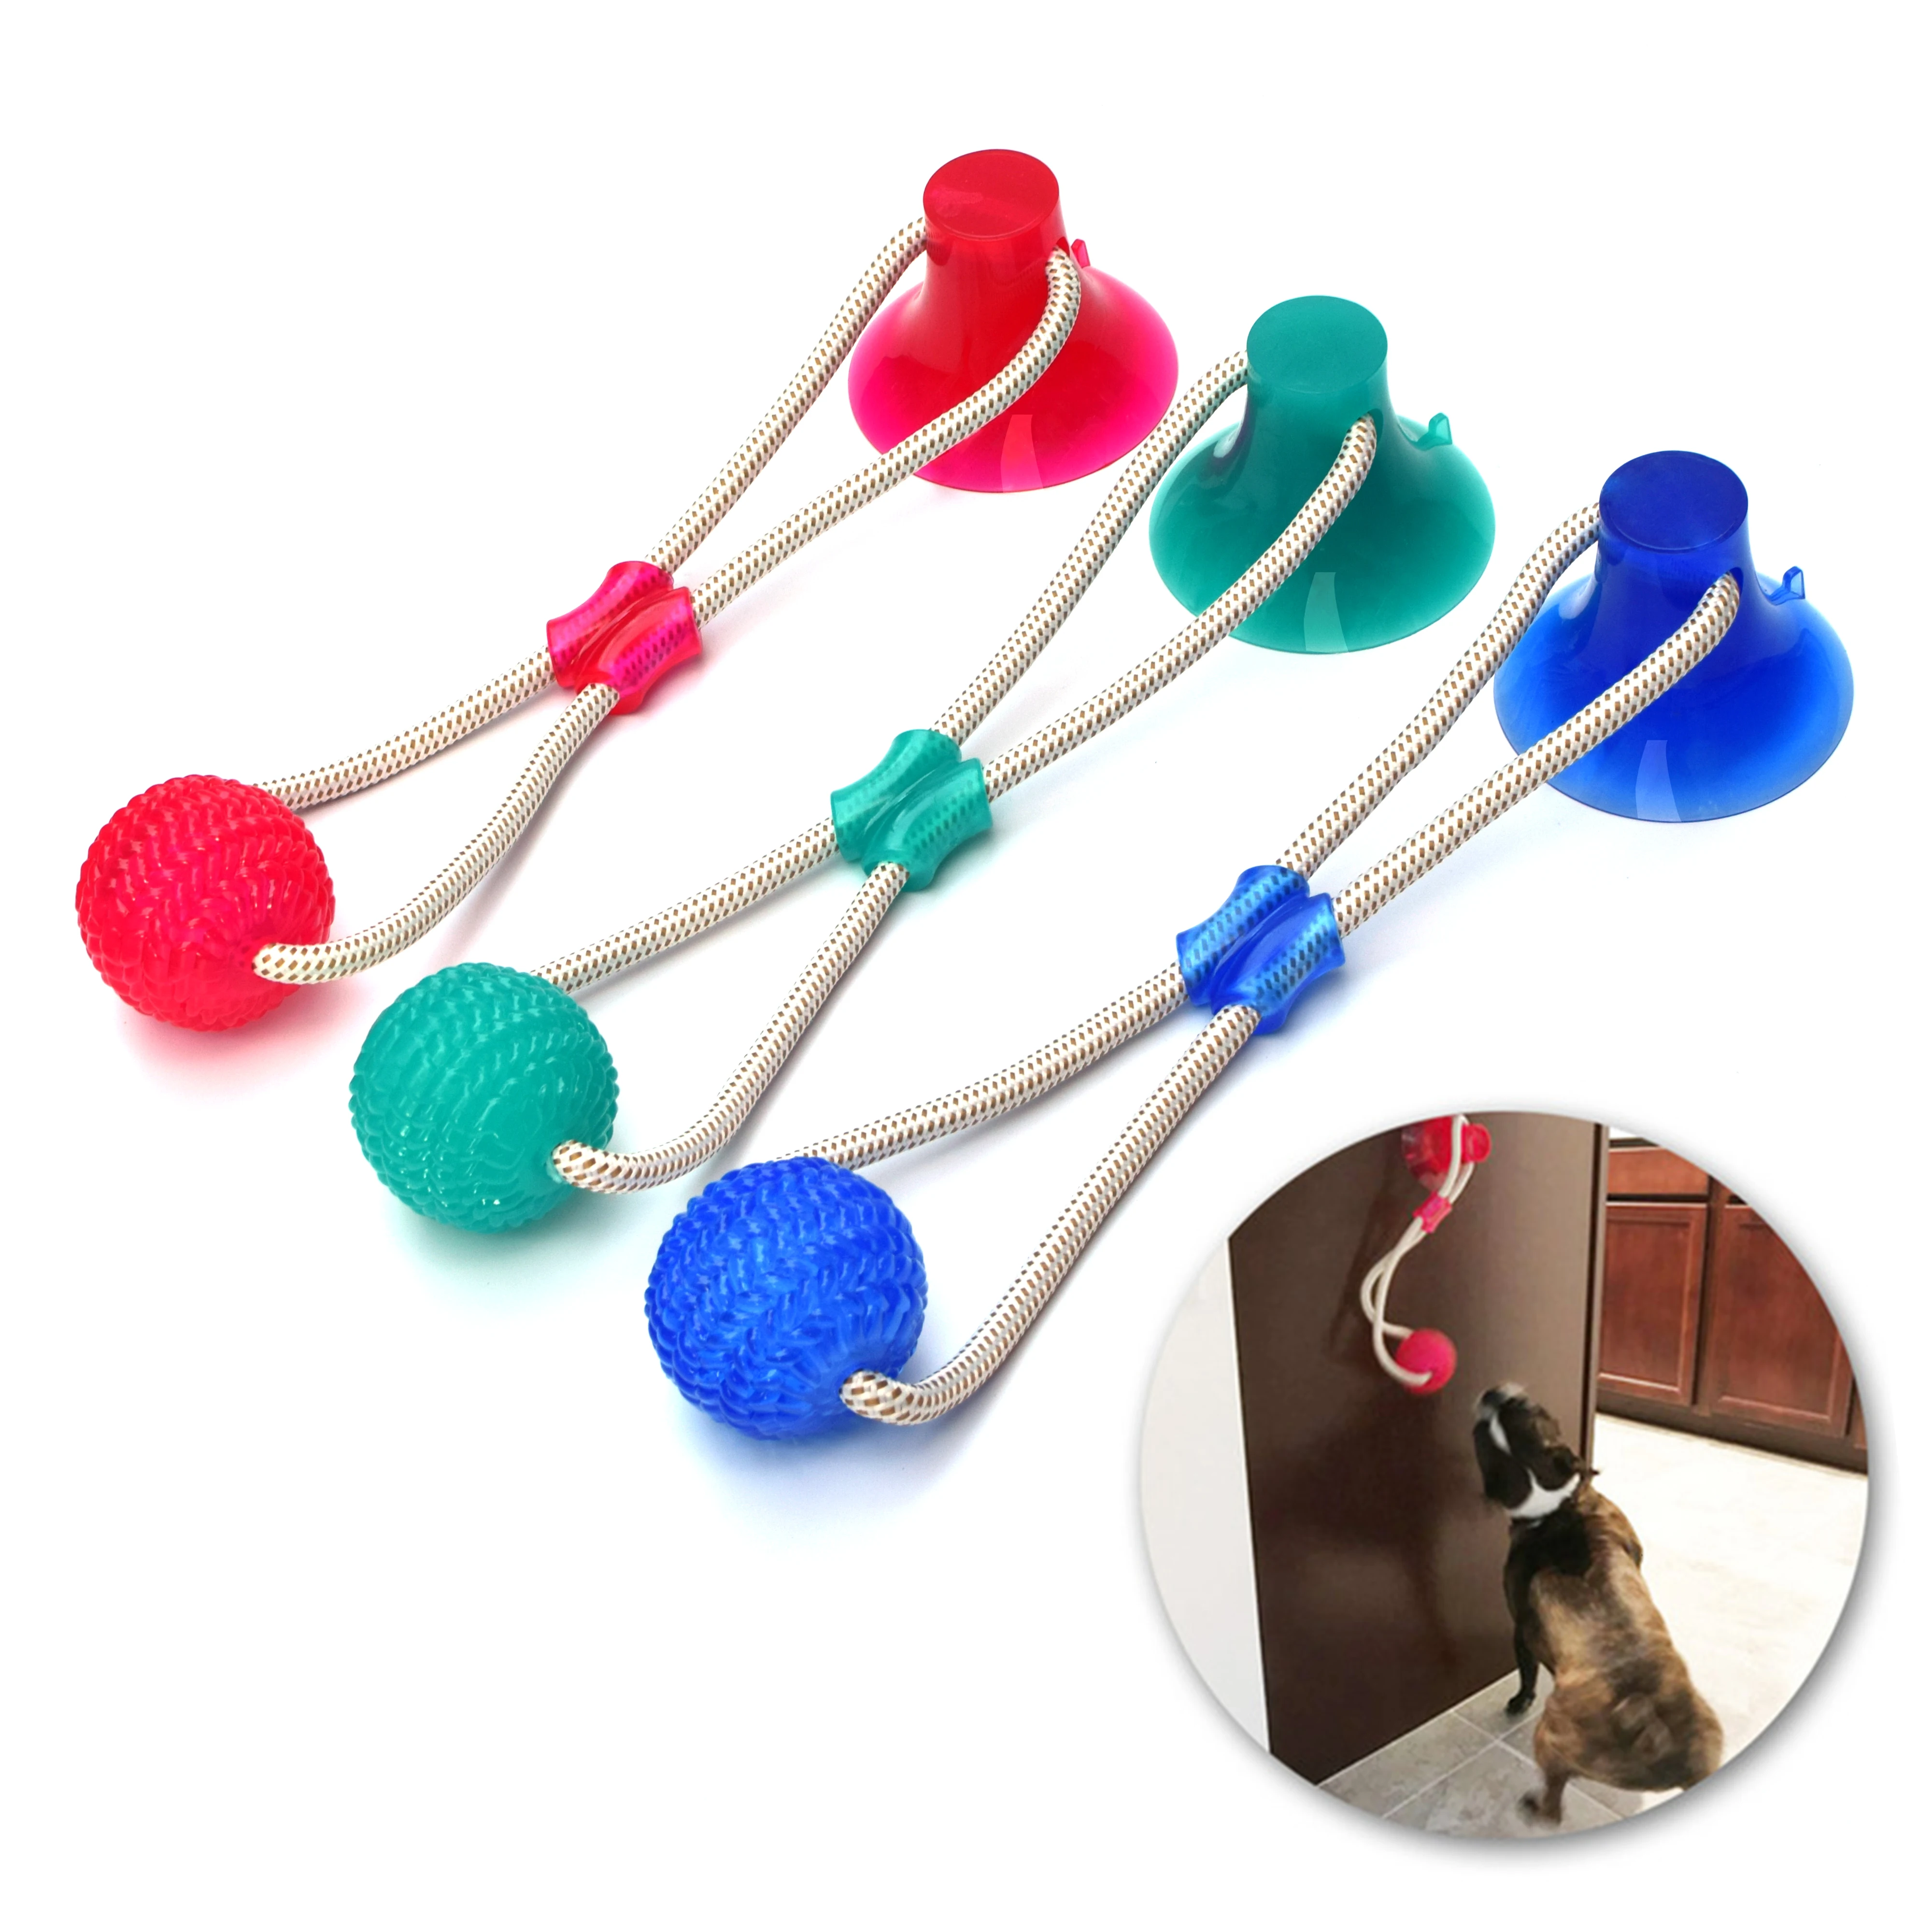 

Multifunction Pet Molar Bite Toys, Rubber Chew Ball, Cleaning Teeth, Safe Elasticity, TPR Soft Puppy Suction Cup, Biting Dog Toy